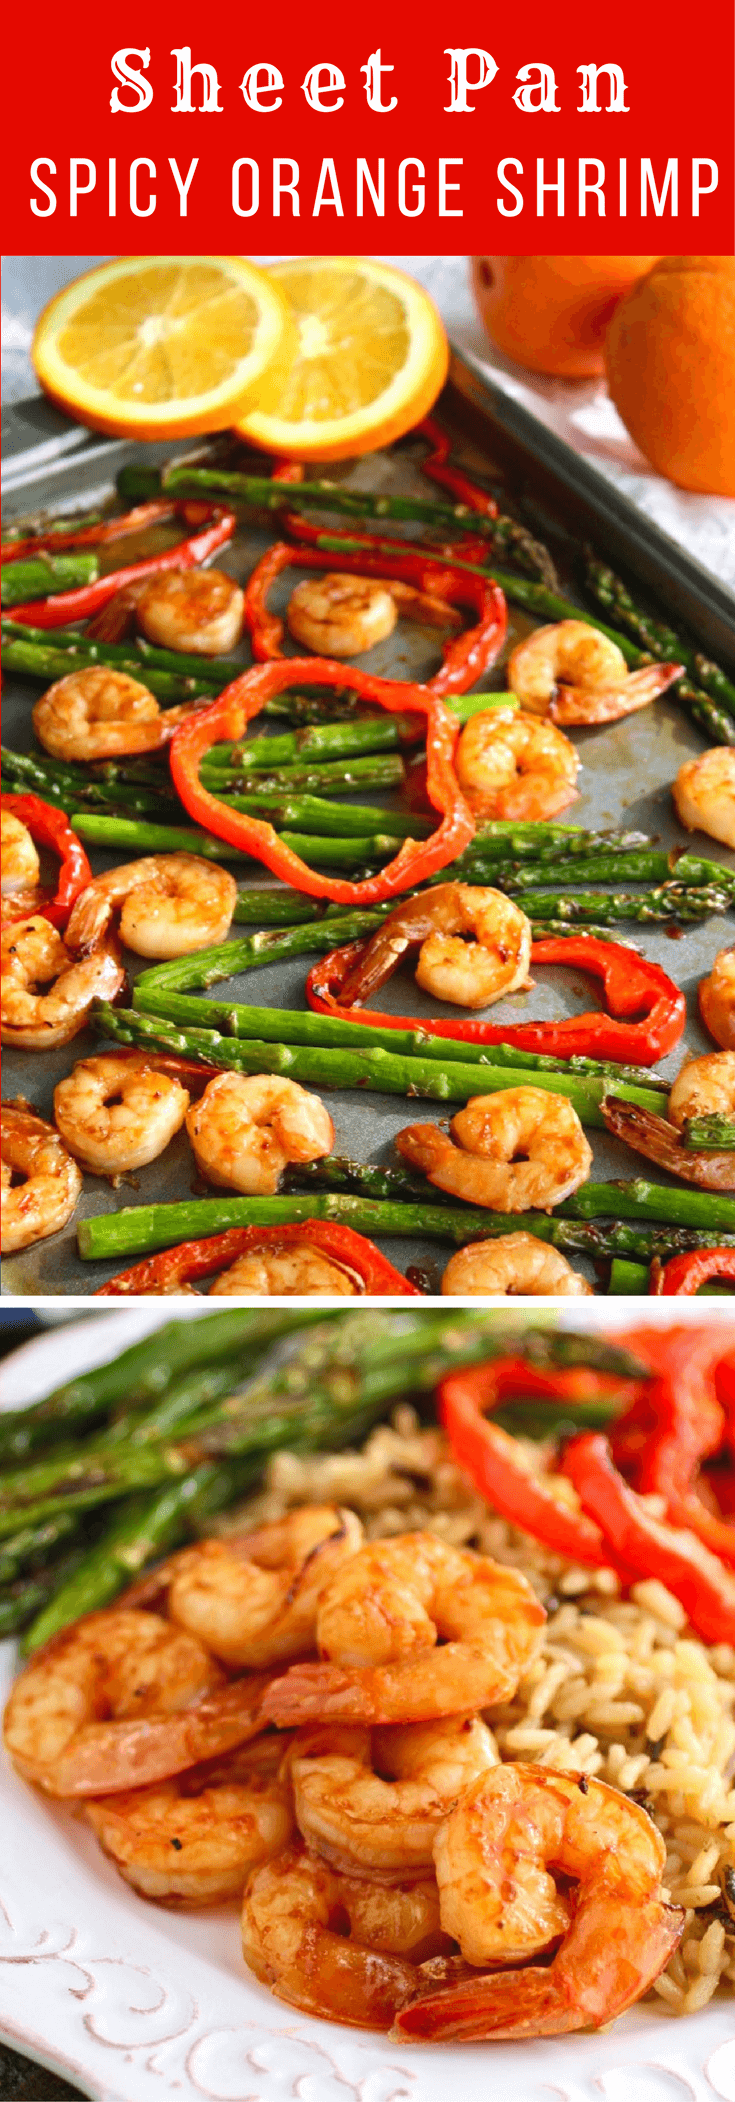 Sheet Pan Spicy Orange Shrimp with Vegetables is a treat for any night of the week. The colors and flavors are fab!